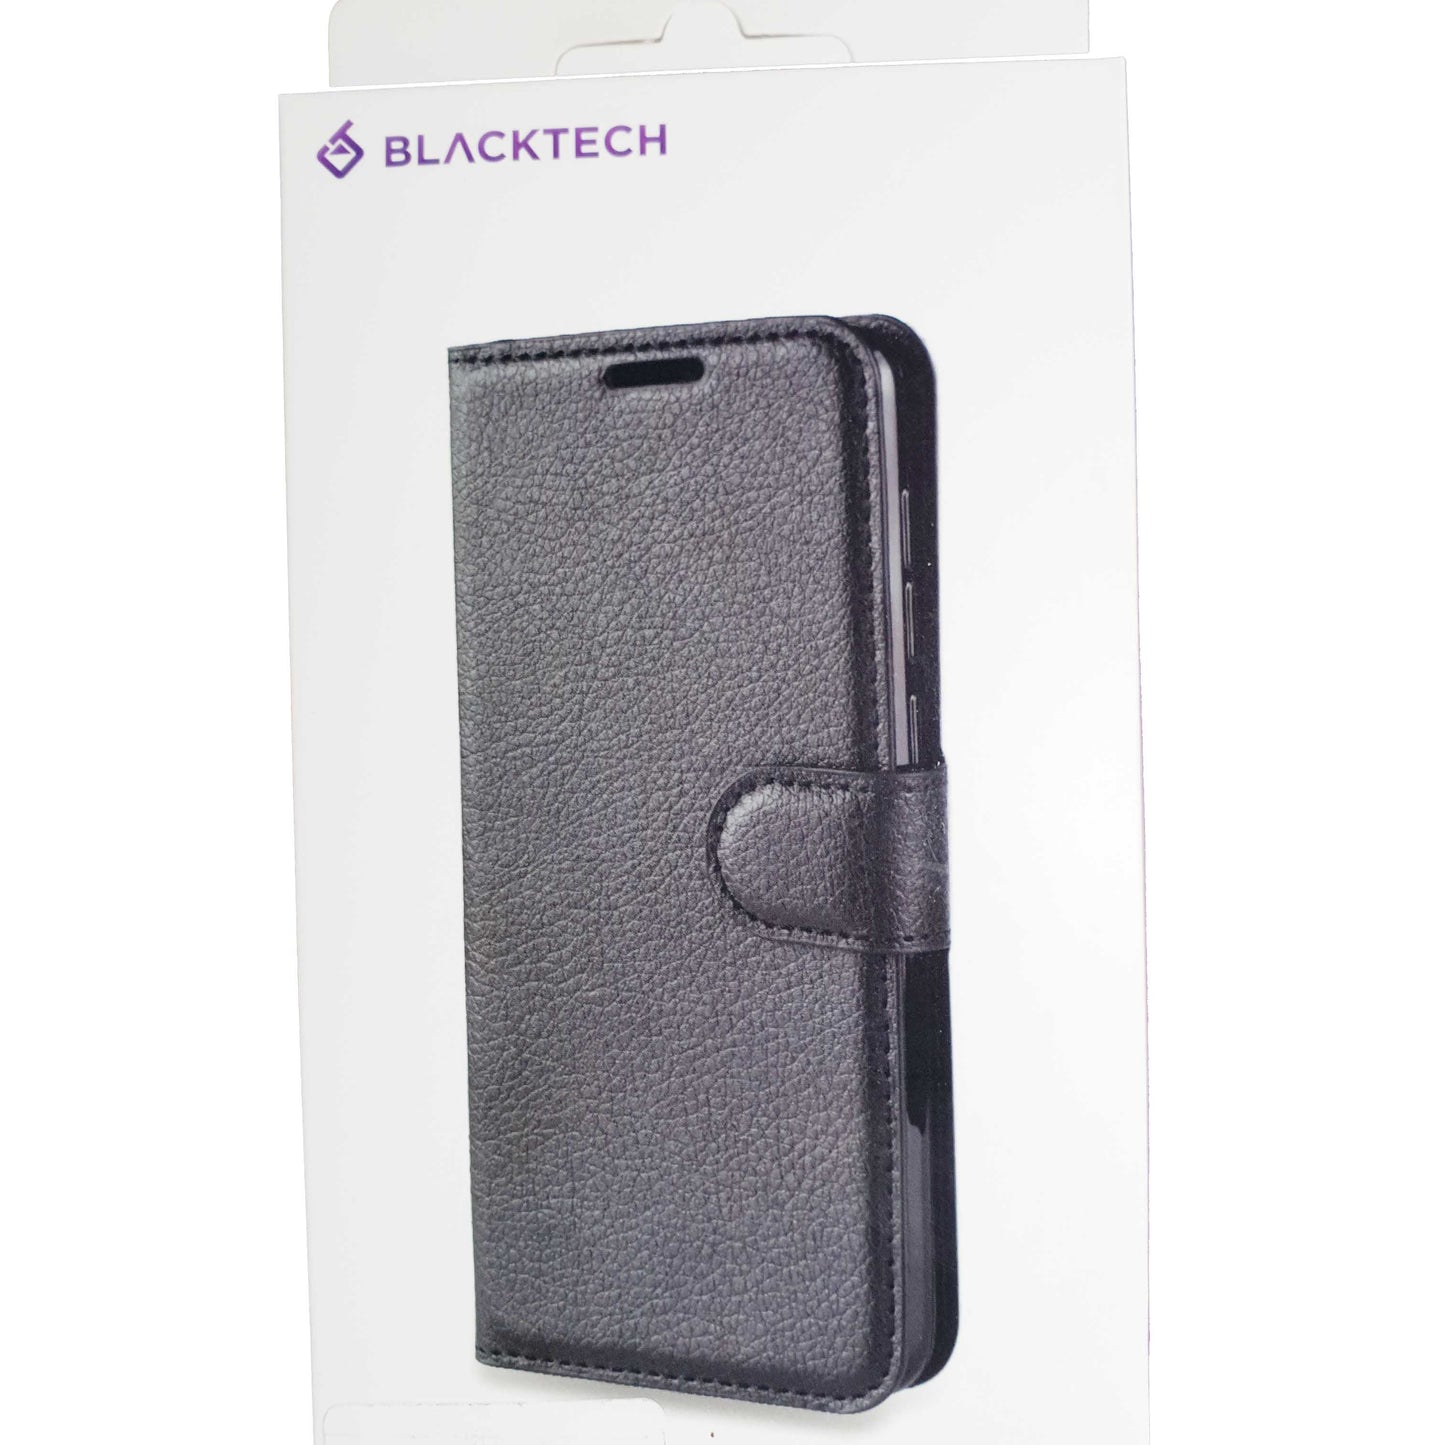 Blacktech Wallet Case Black with ID Cards Pockets for Galaxy A32/A42/A52/A72-Phone Case-Blacktech-www.PhoneGuy.com.au